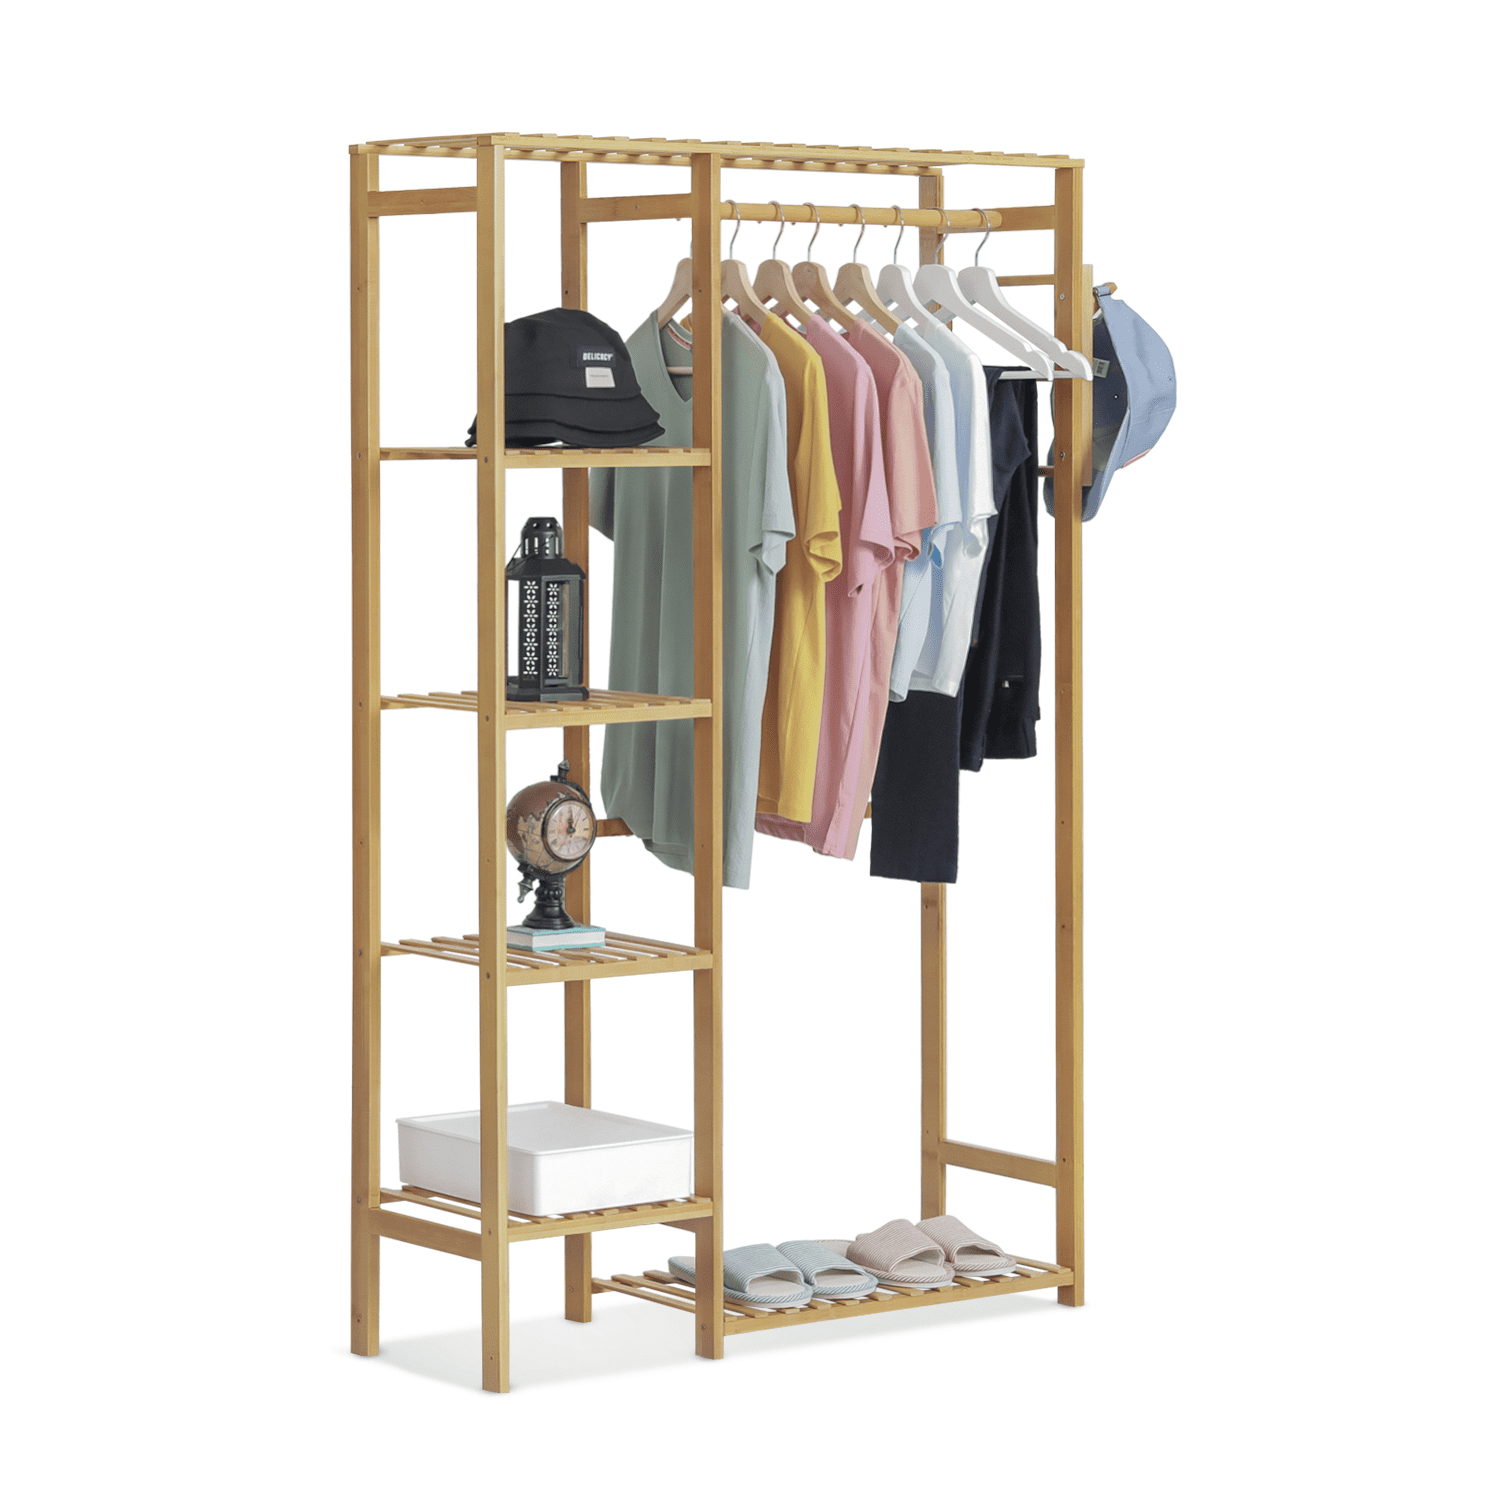 Zerone Free Standing Bamboo Coat Rack Stand Multifunctional Bamboo Wardrobe Stand Mobile Clothes Storage Rack with 8 Coat Hooks 2-Tier Shoe Clothes Storage Shelves